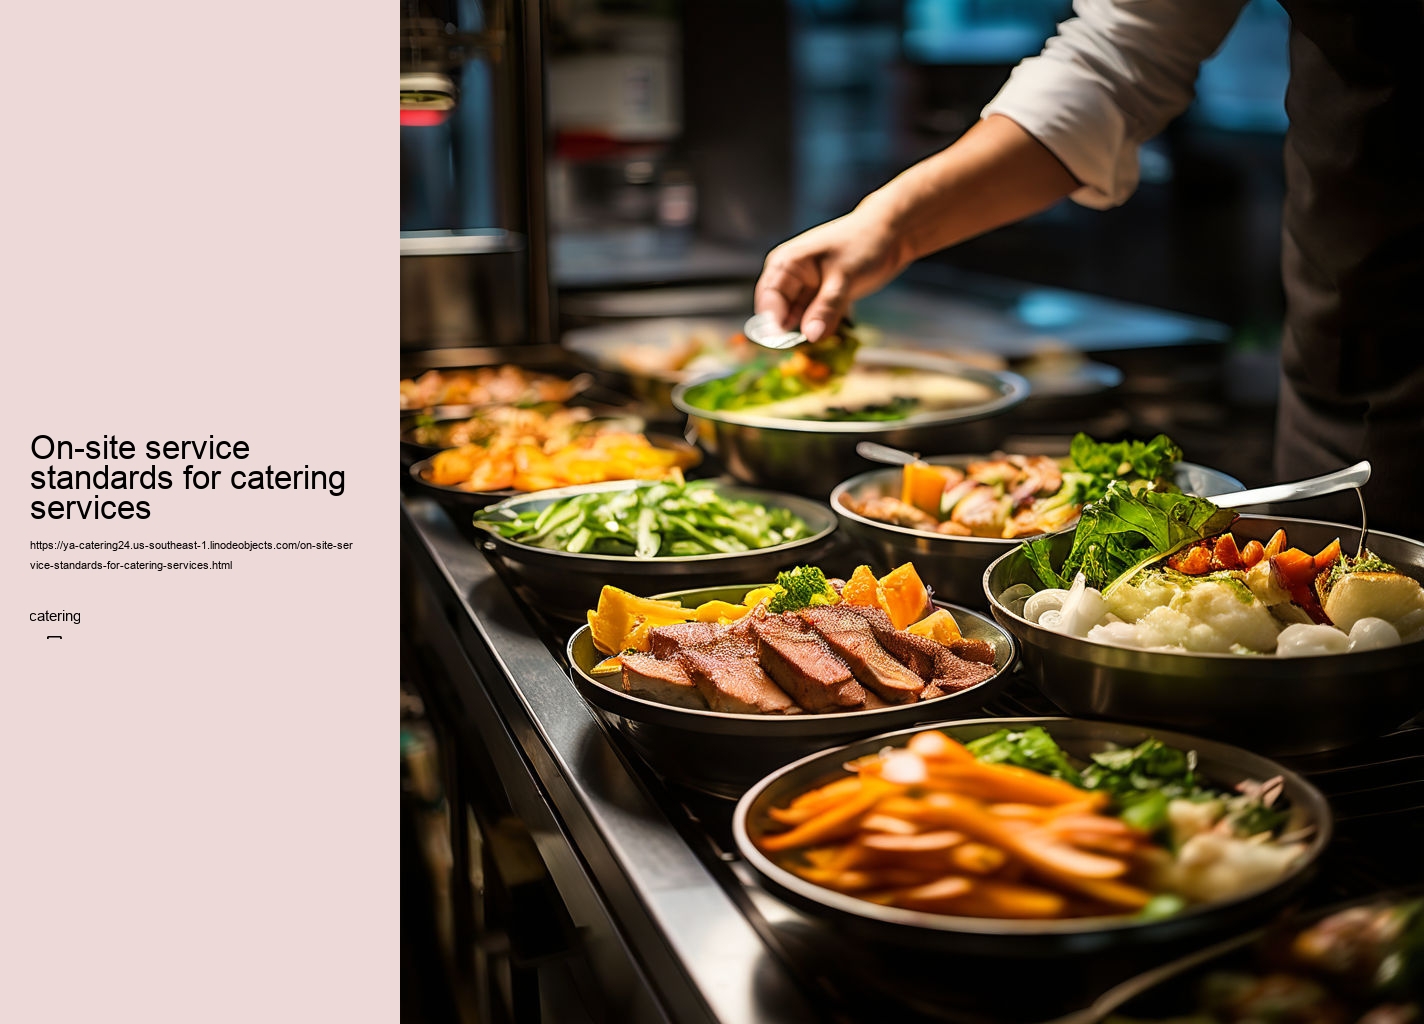 On-site service standards for catering services